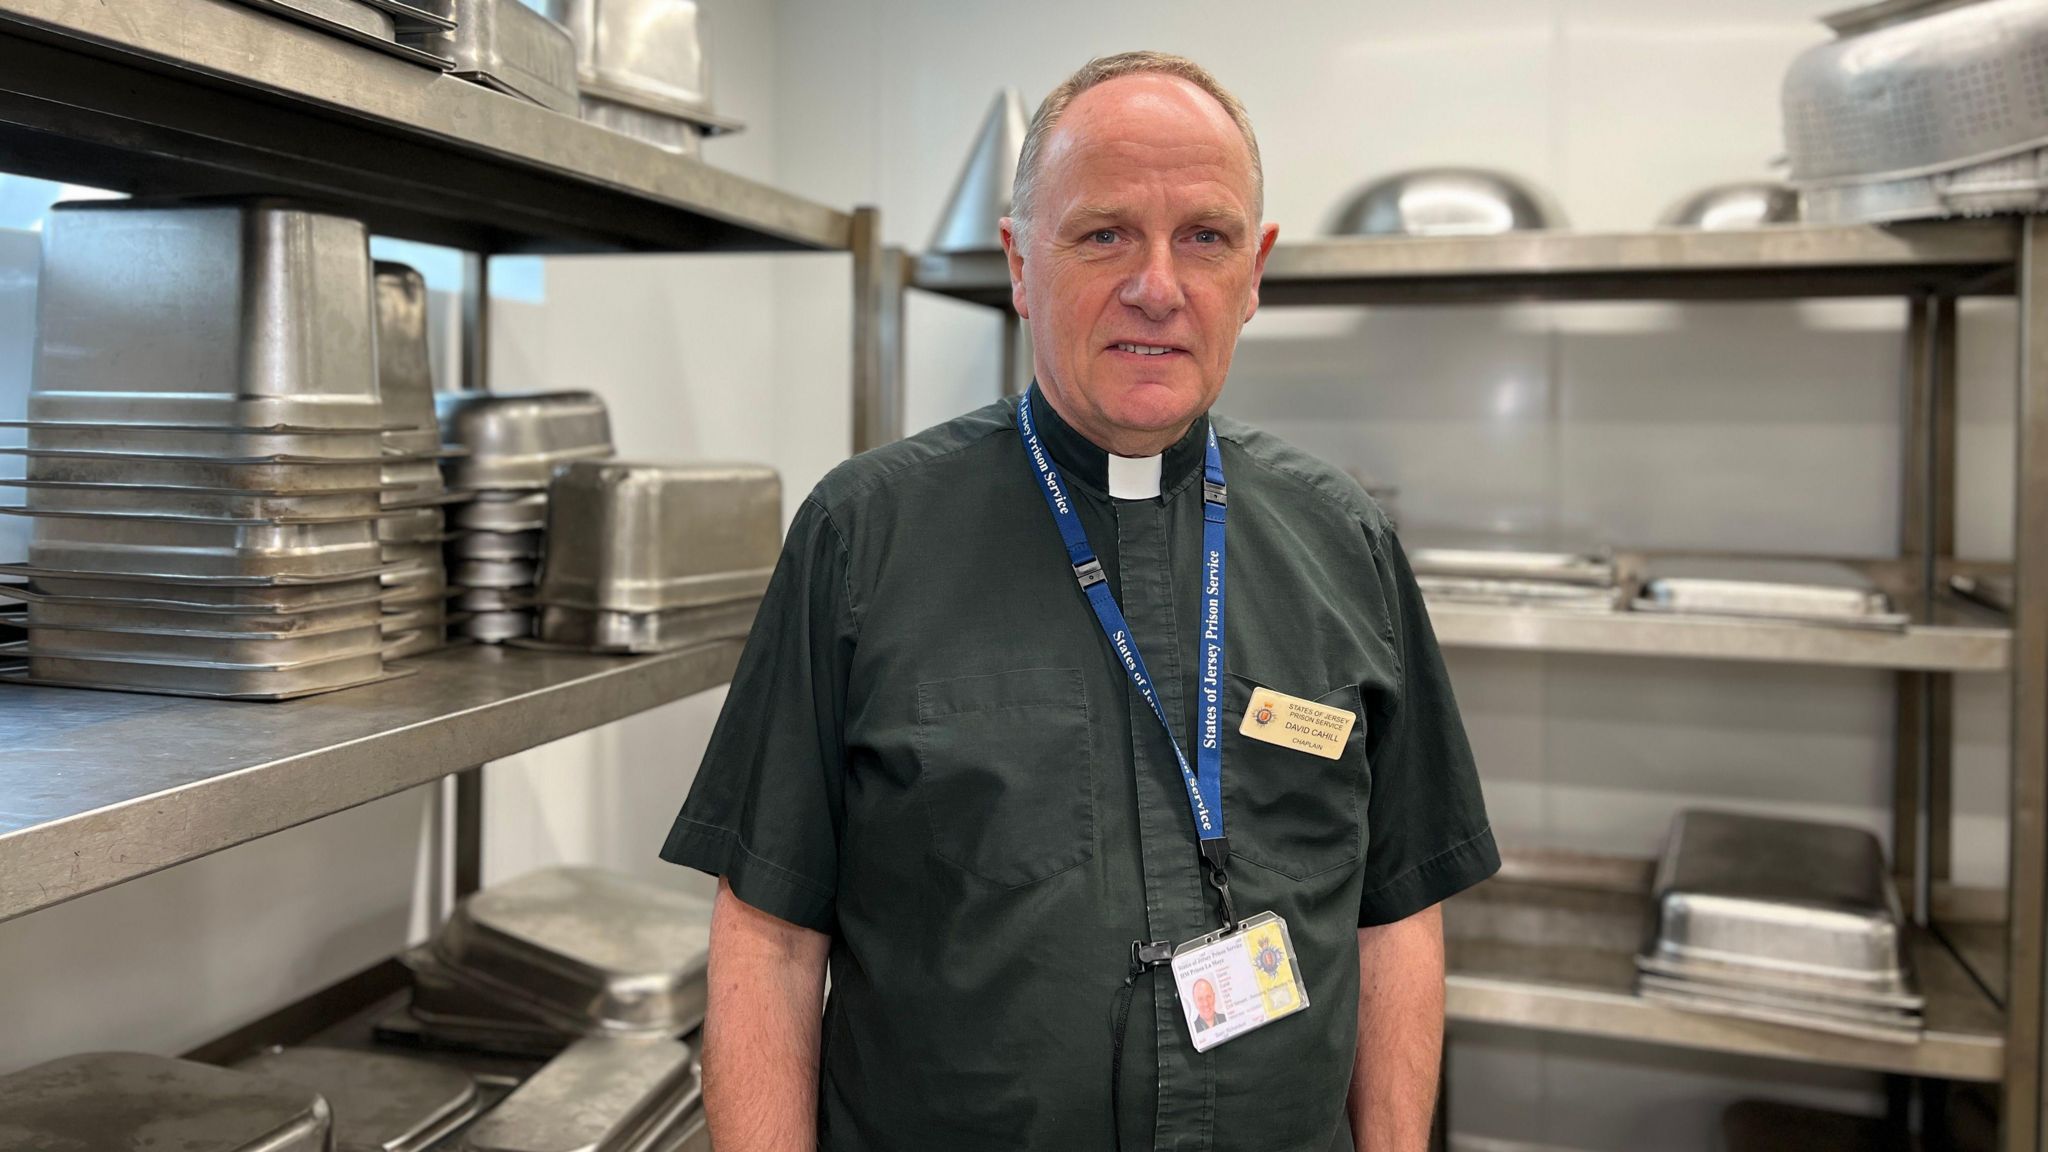 La Moye HMP Chaplain David Cahill stands in the prison kitchen looking at the camera as inmates collect their food for Eid